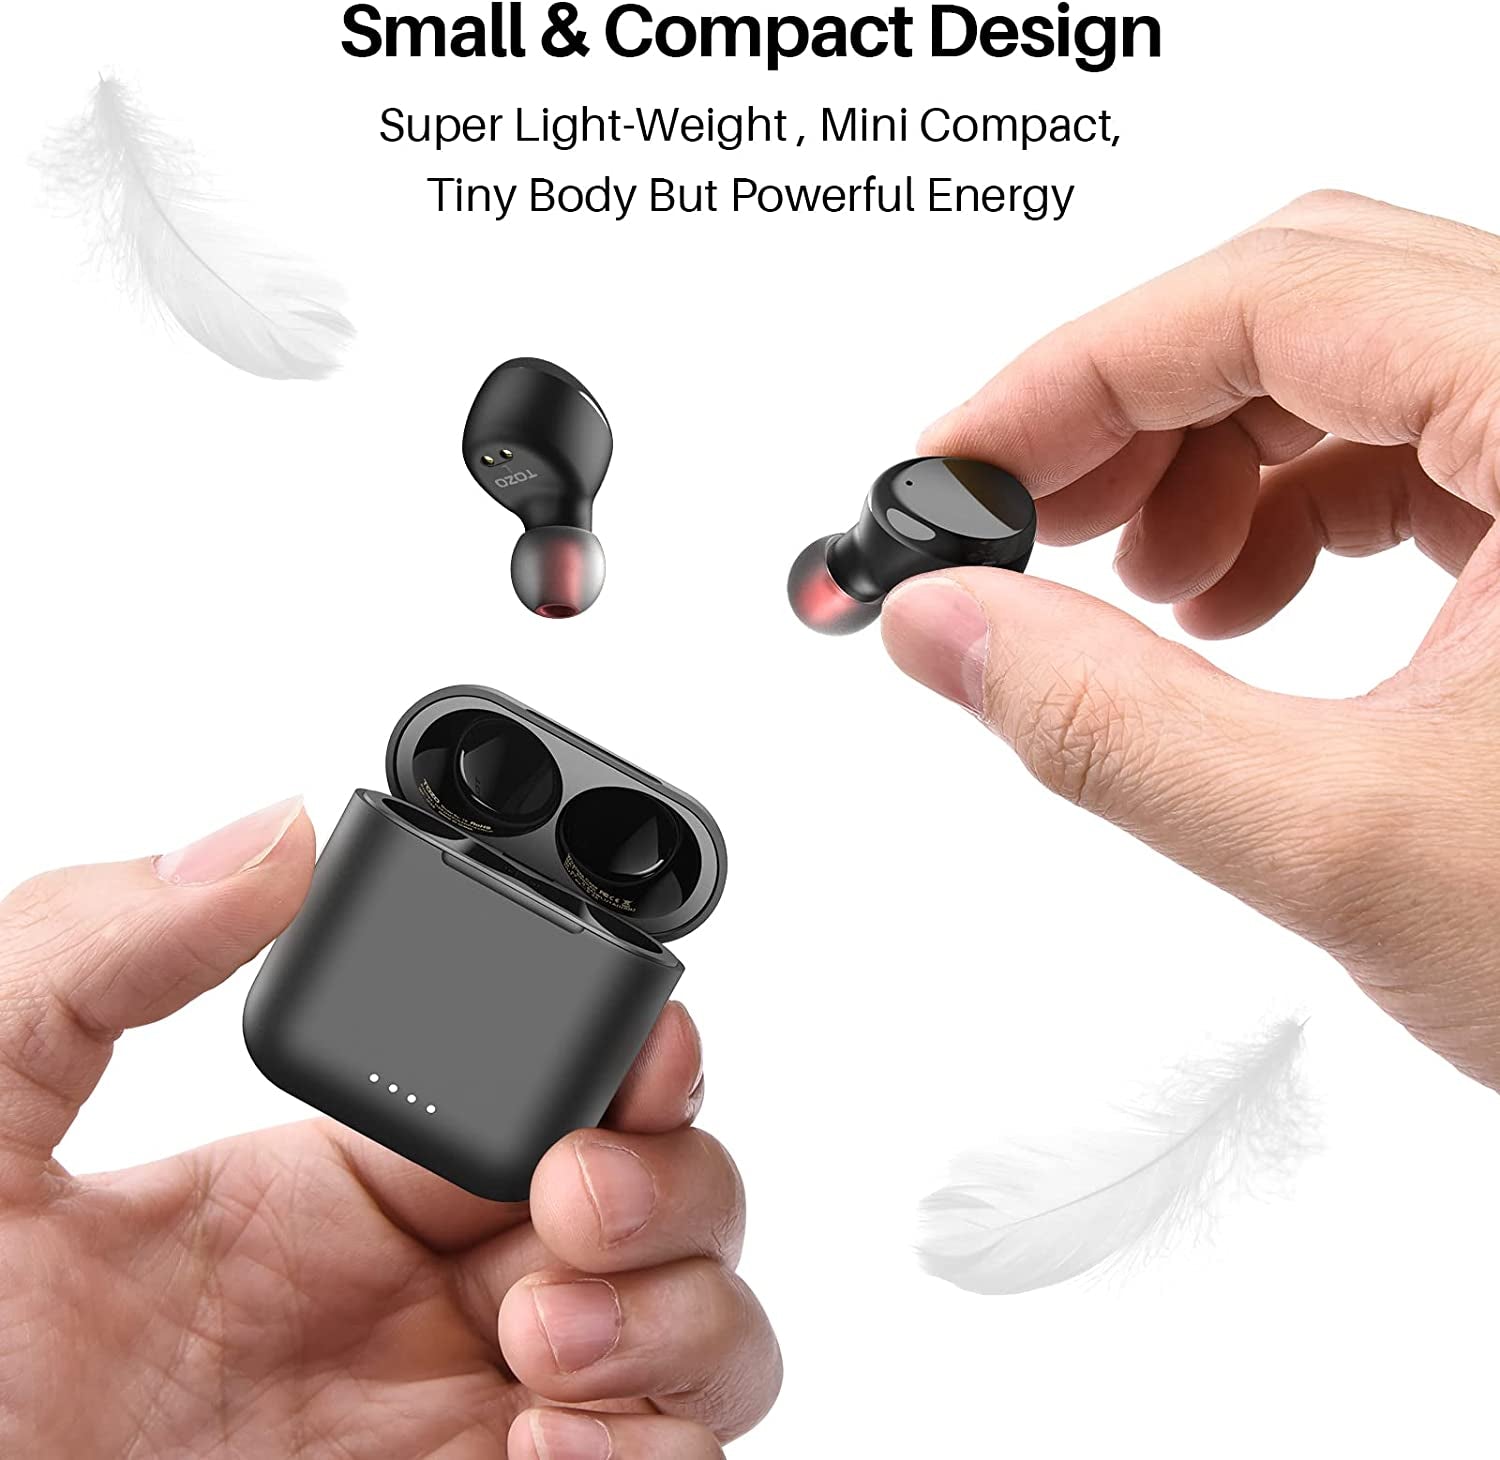 TOZO T6 True Wireless Earbuds Bluetooth 5.3 Headphones Touch Control with Wireless Charging Case IPX8 Waterproof Stereo Earphones In-Ear Built-In Mic Headset Premium Deep Bass Black